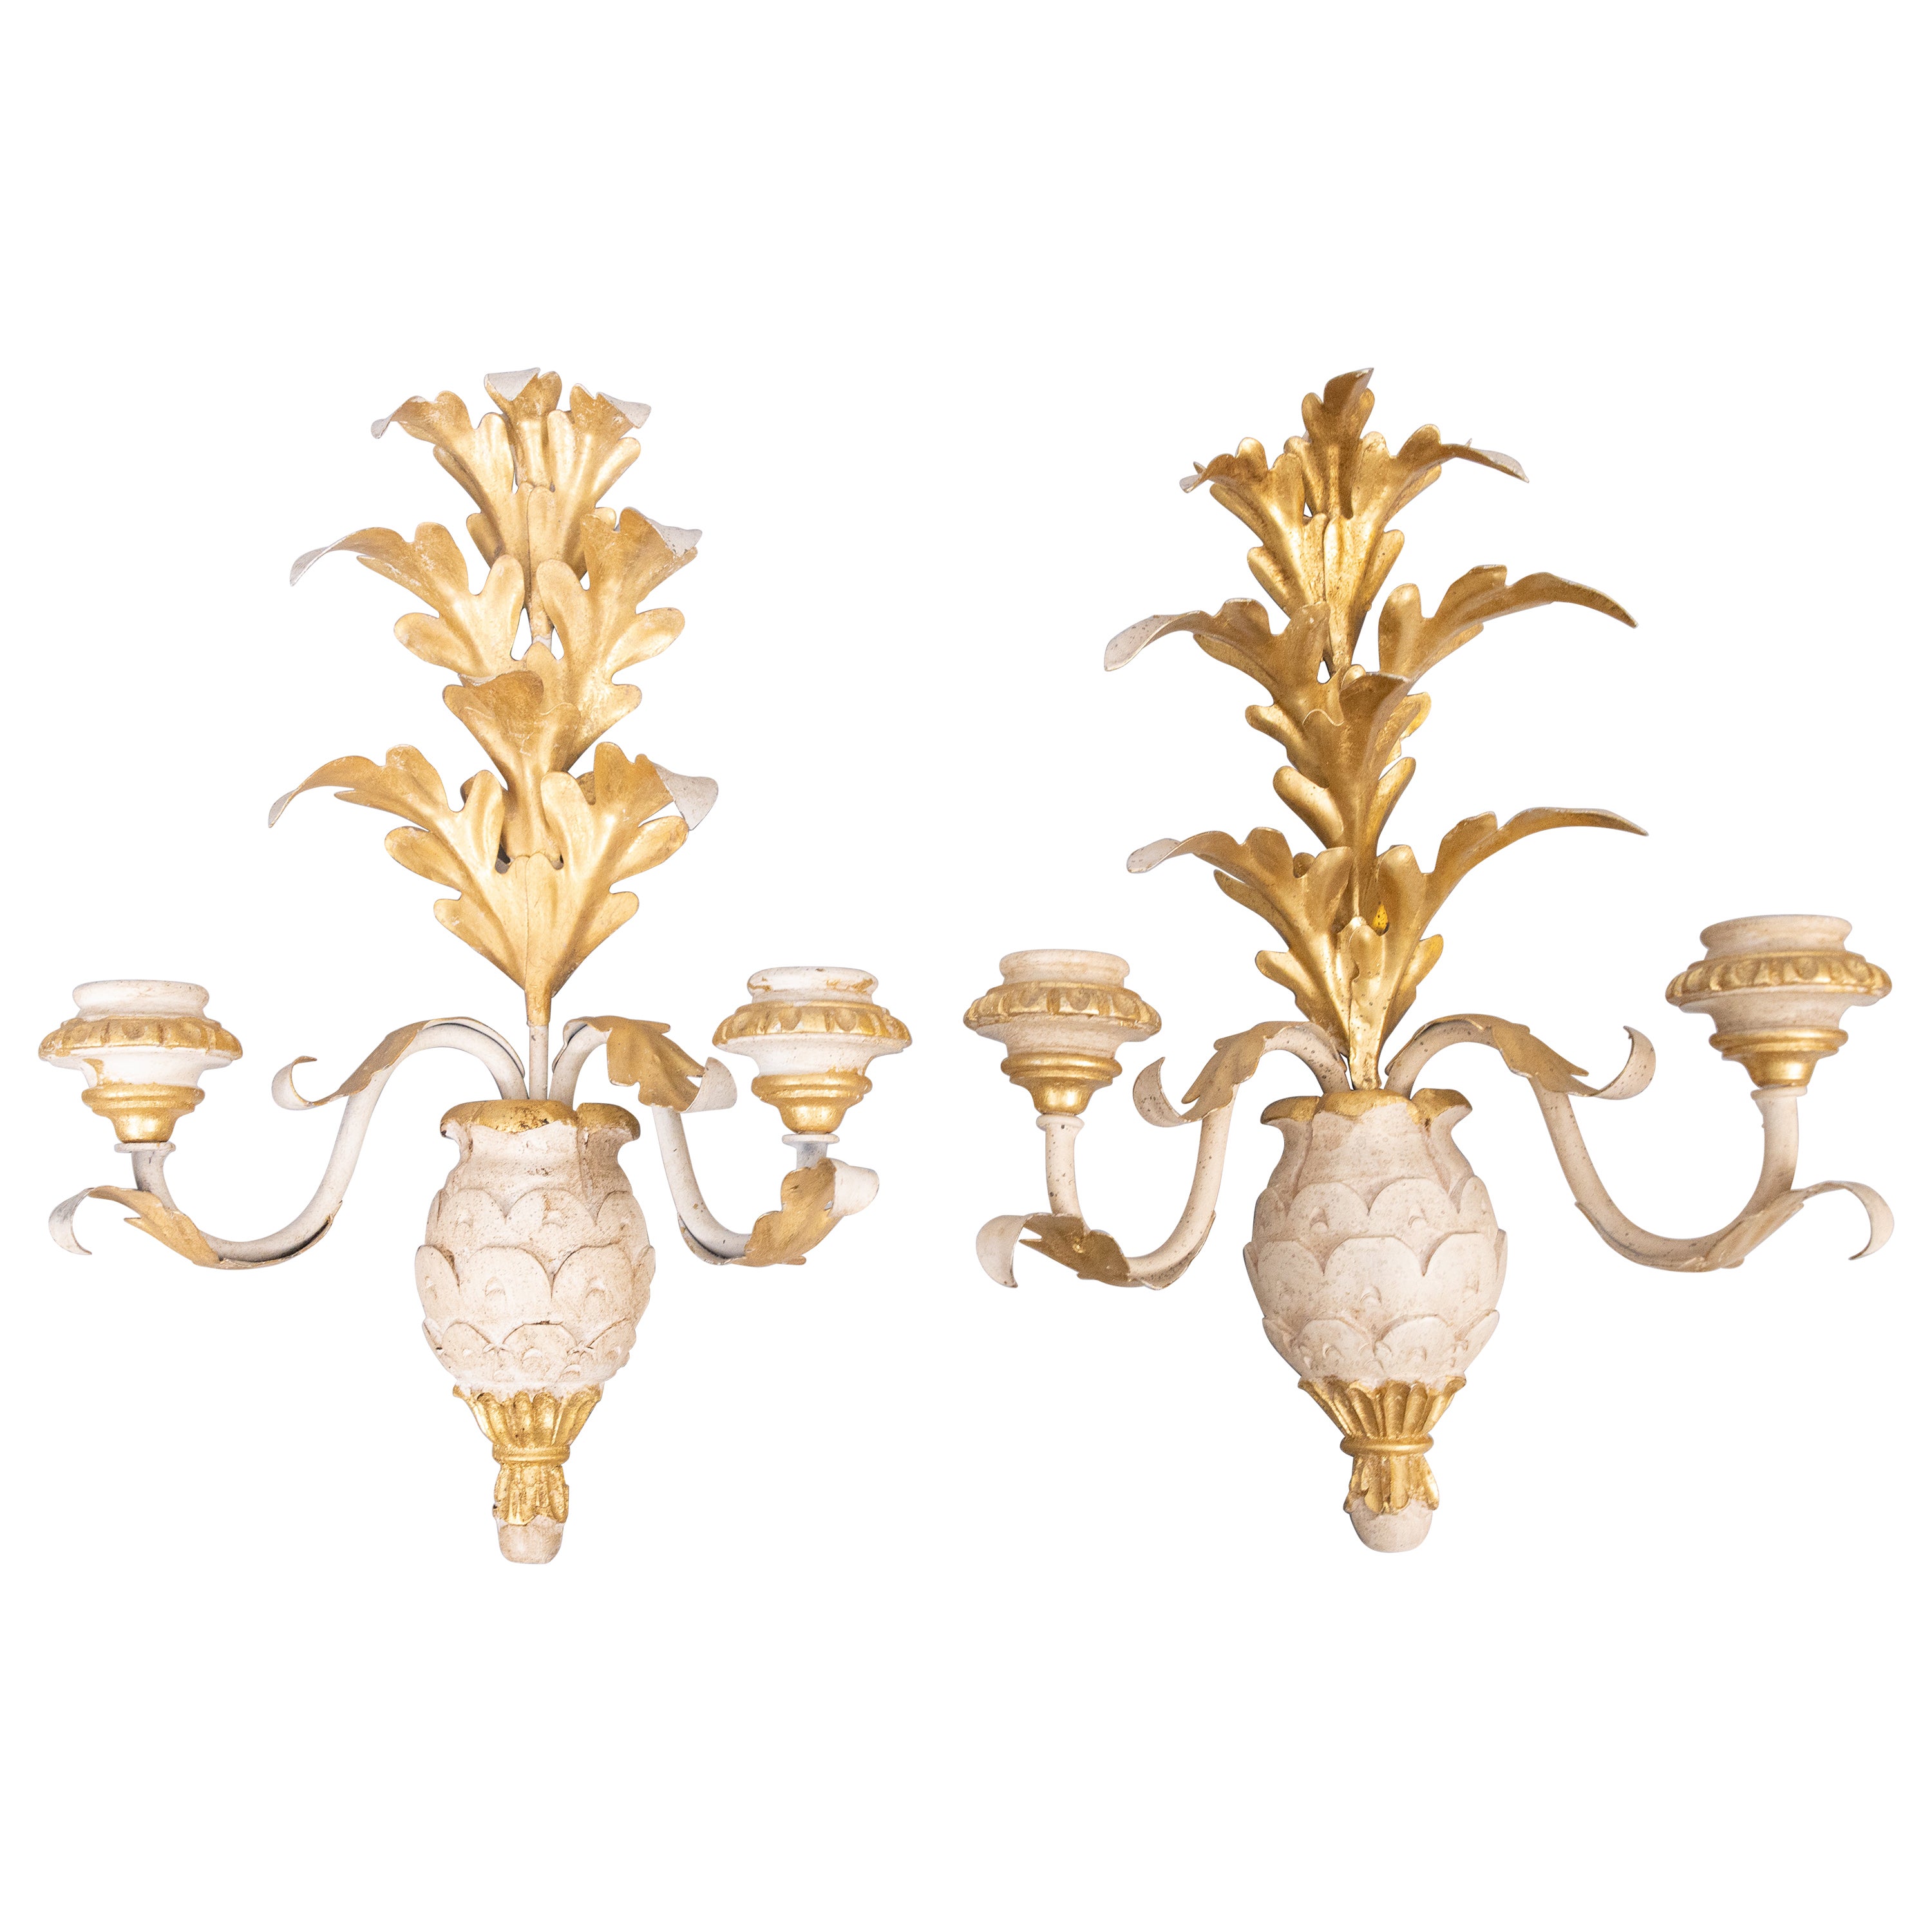 Pair of Mid-20th Century Italian Giltwood & Tole Pineapple Candle Sconces